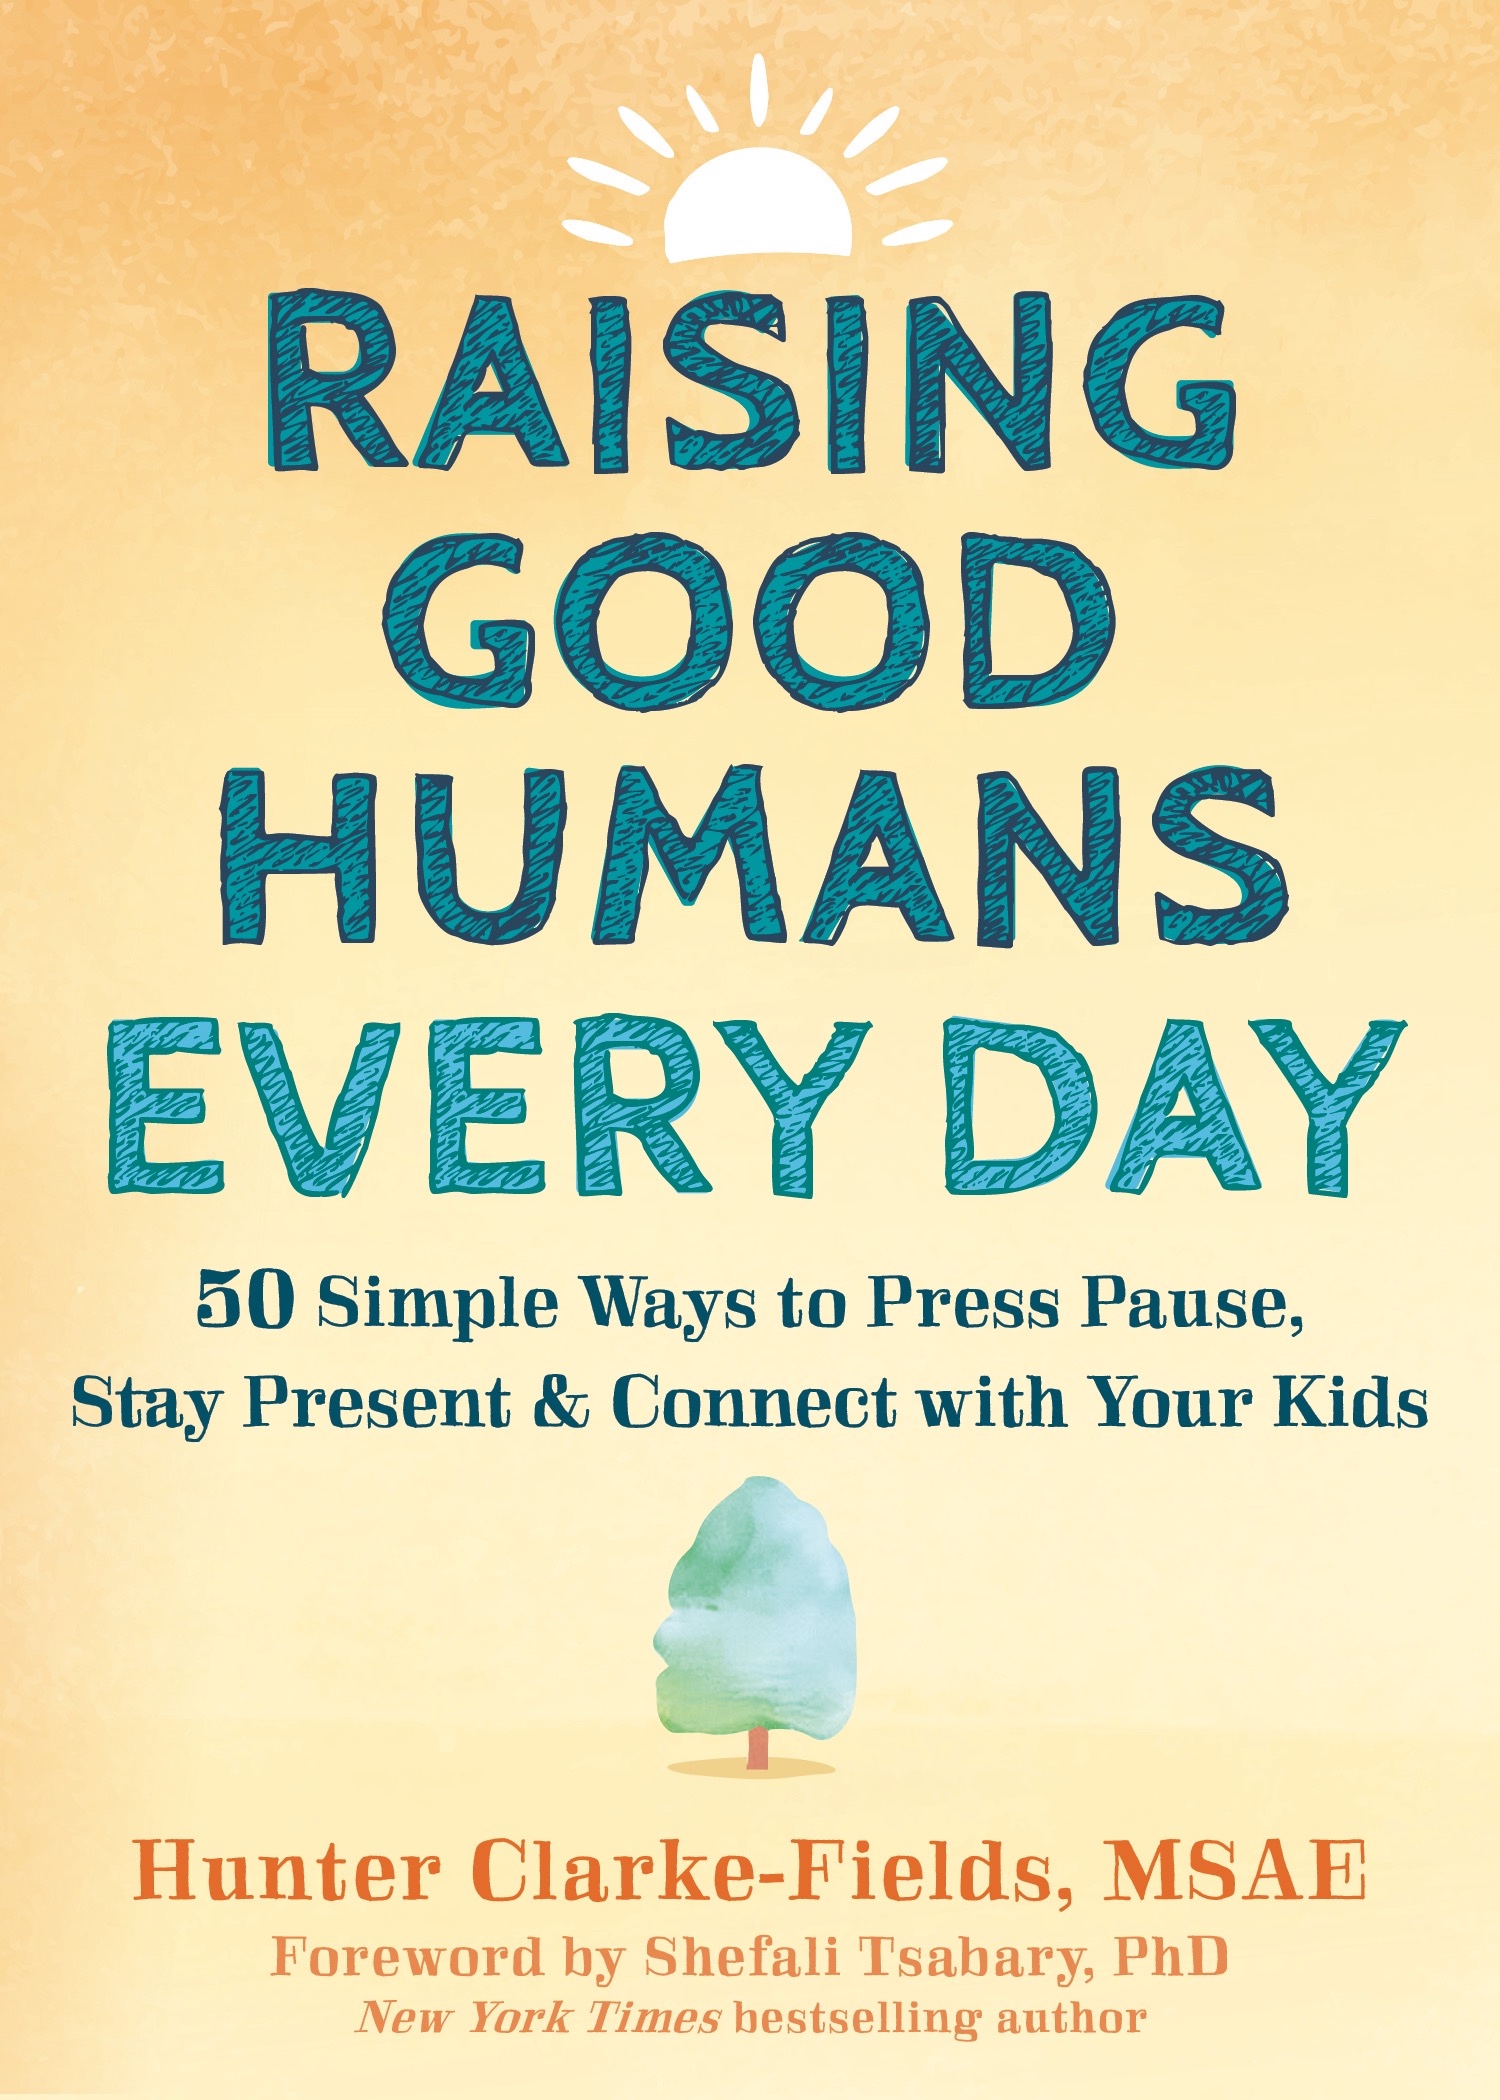 Mindful Mama Mentor Hunter Clarke-Fields announces the launch of her new parenting book: “Raising Good Humans Every Day - 50 Simple Ways to Press Pause, Stay Present and Connect with your Kids”